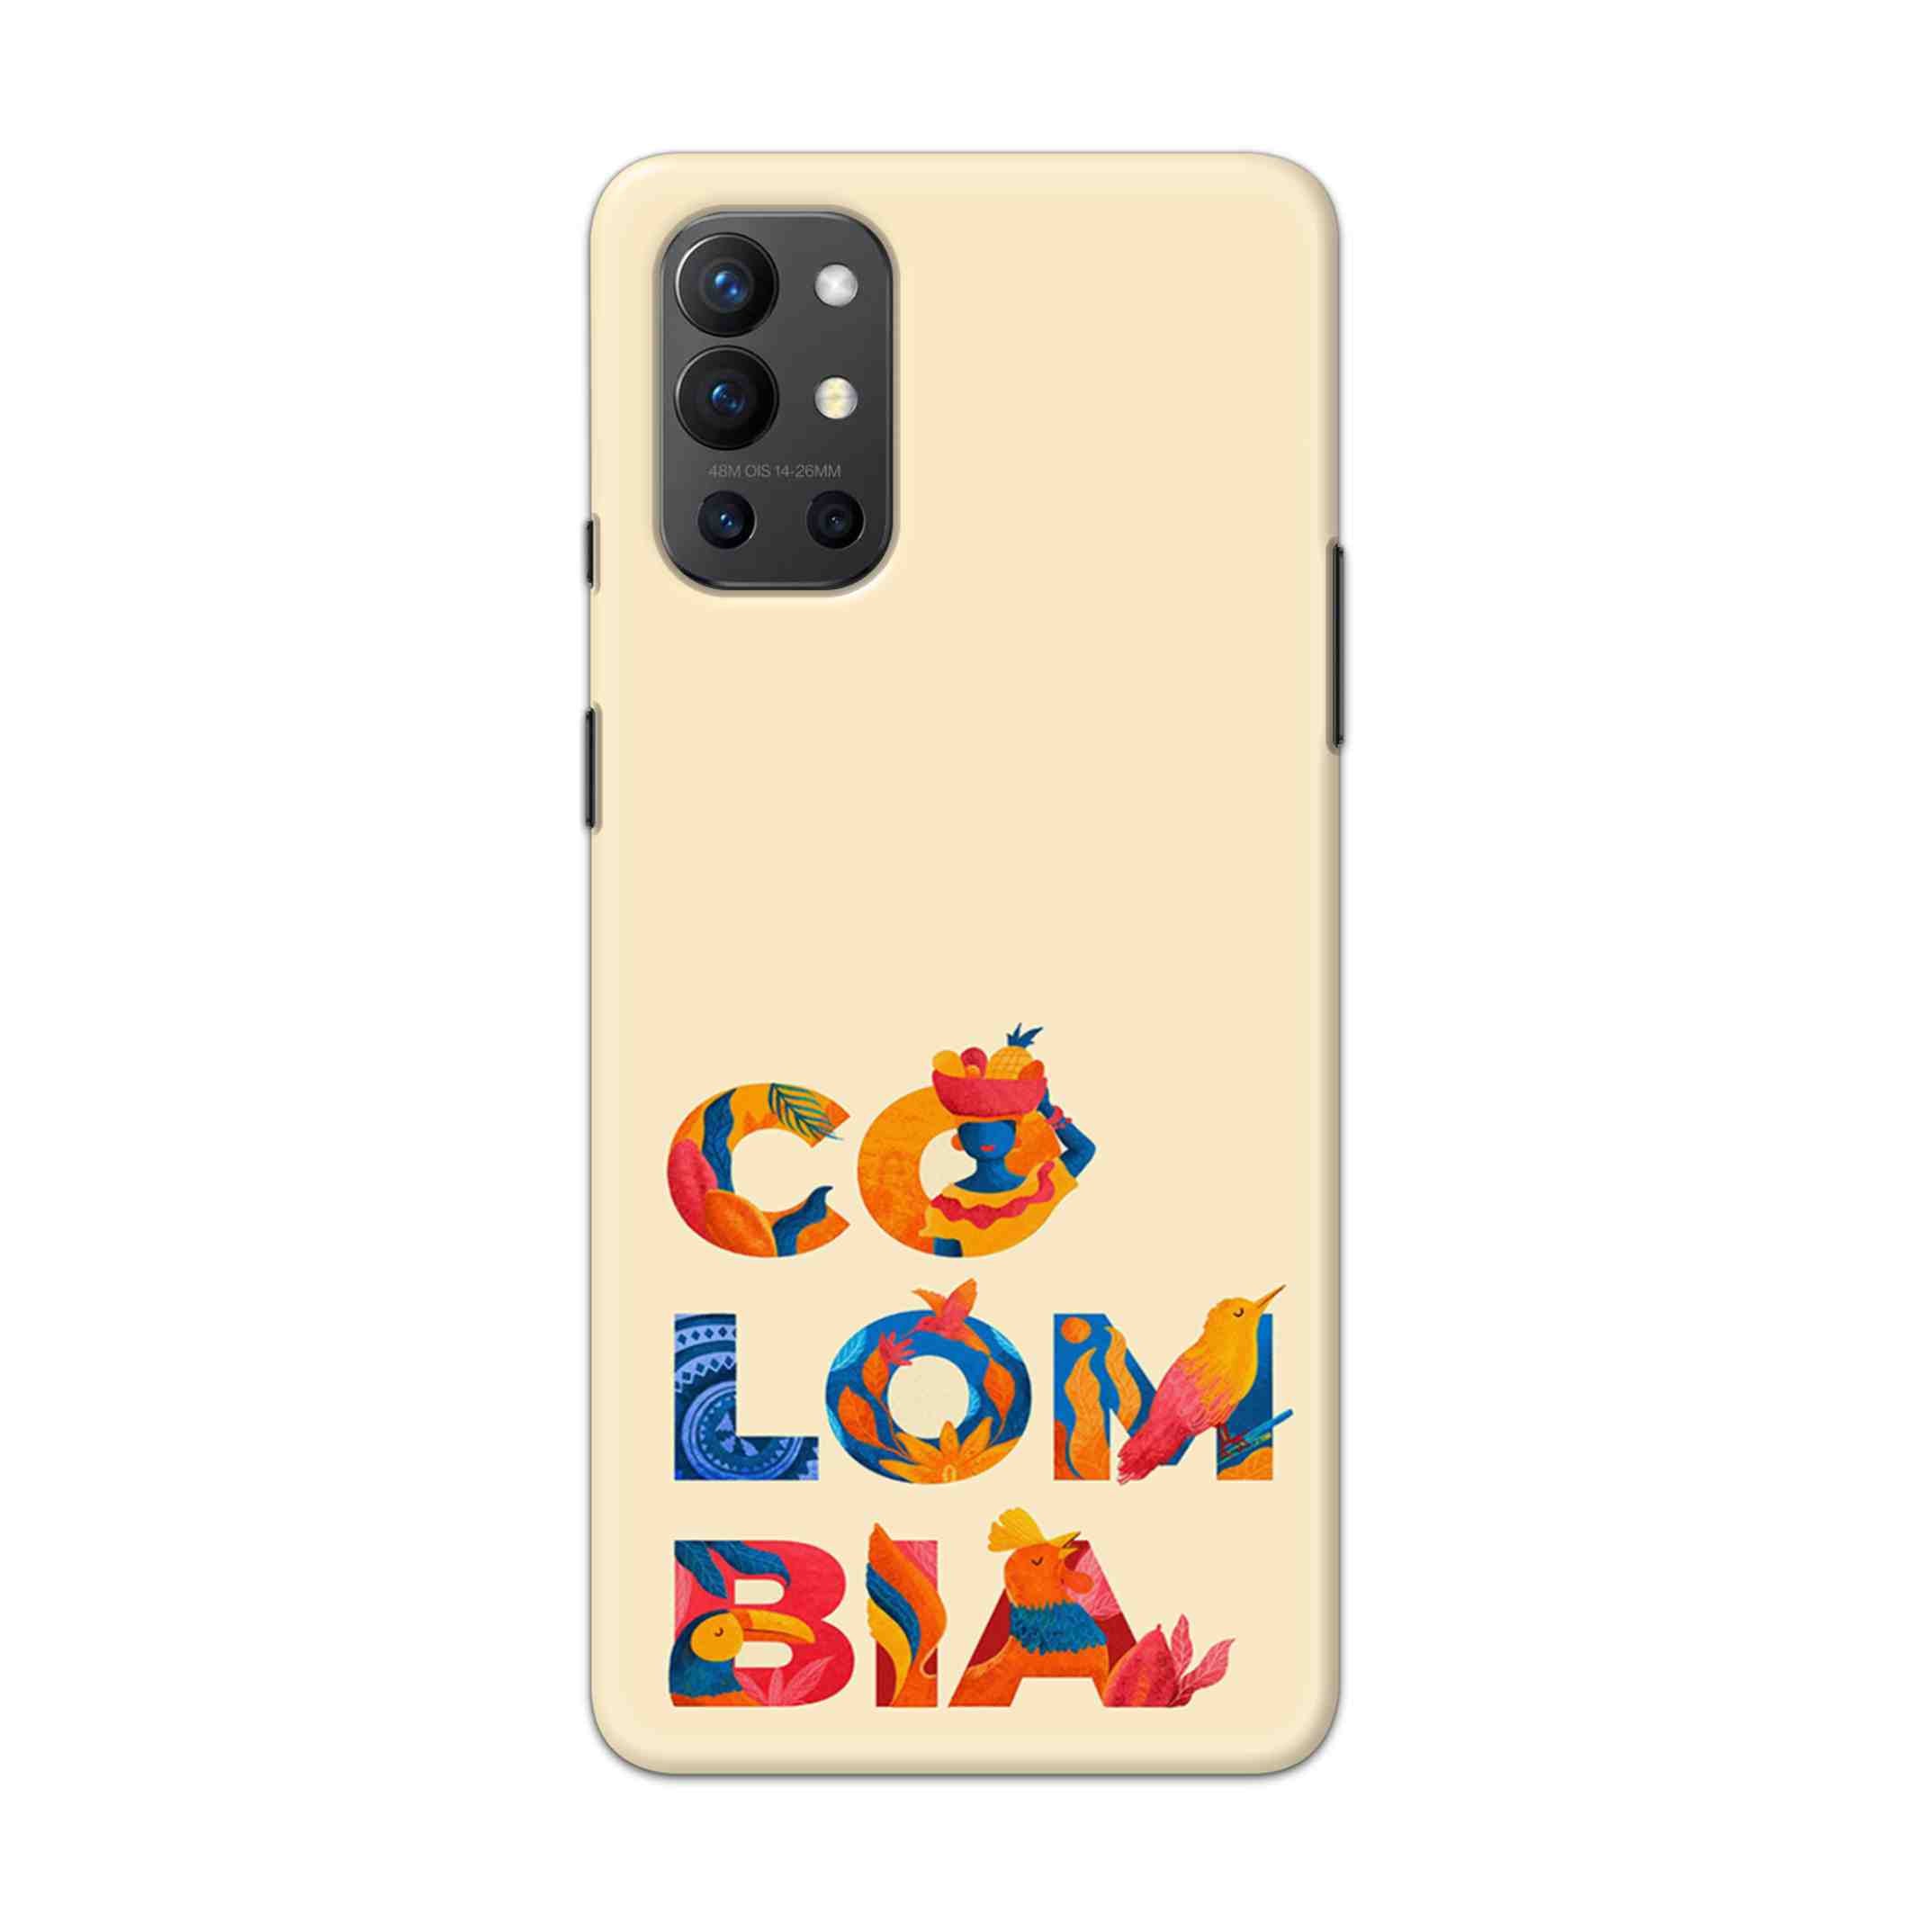 Buy Colombia Hard Back Mobile Phone Case Cover For OnePlus 9R / 8T Online